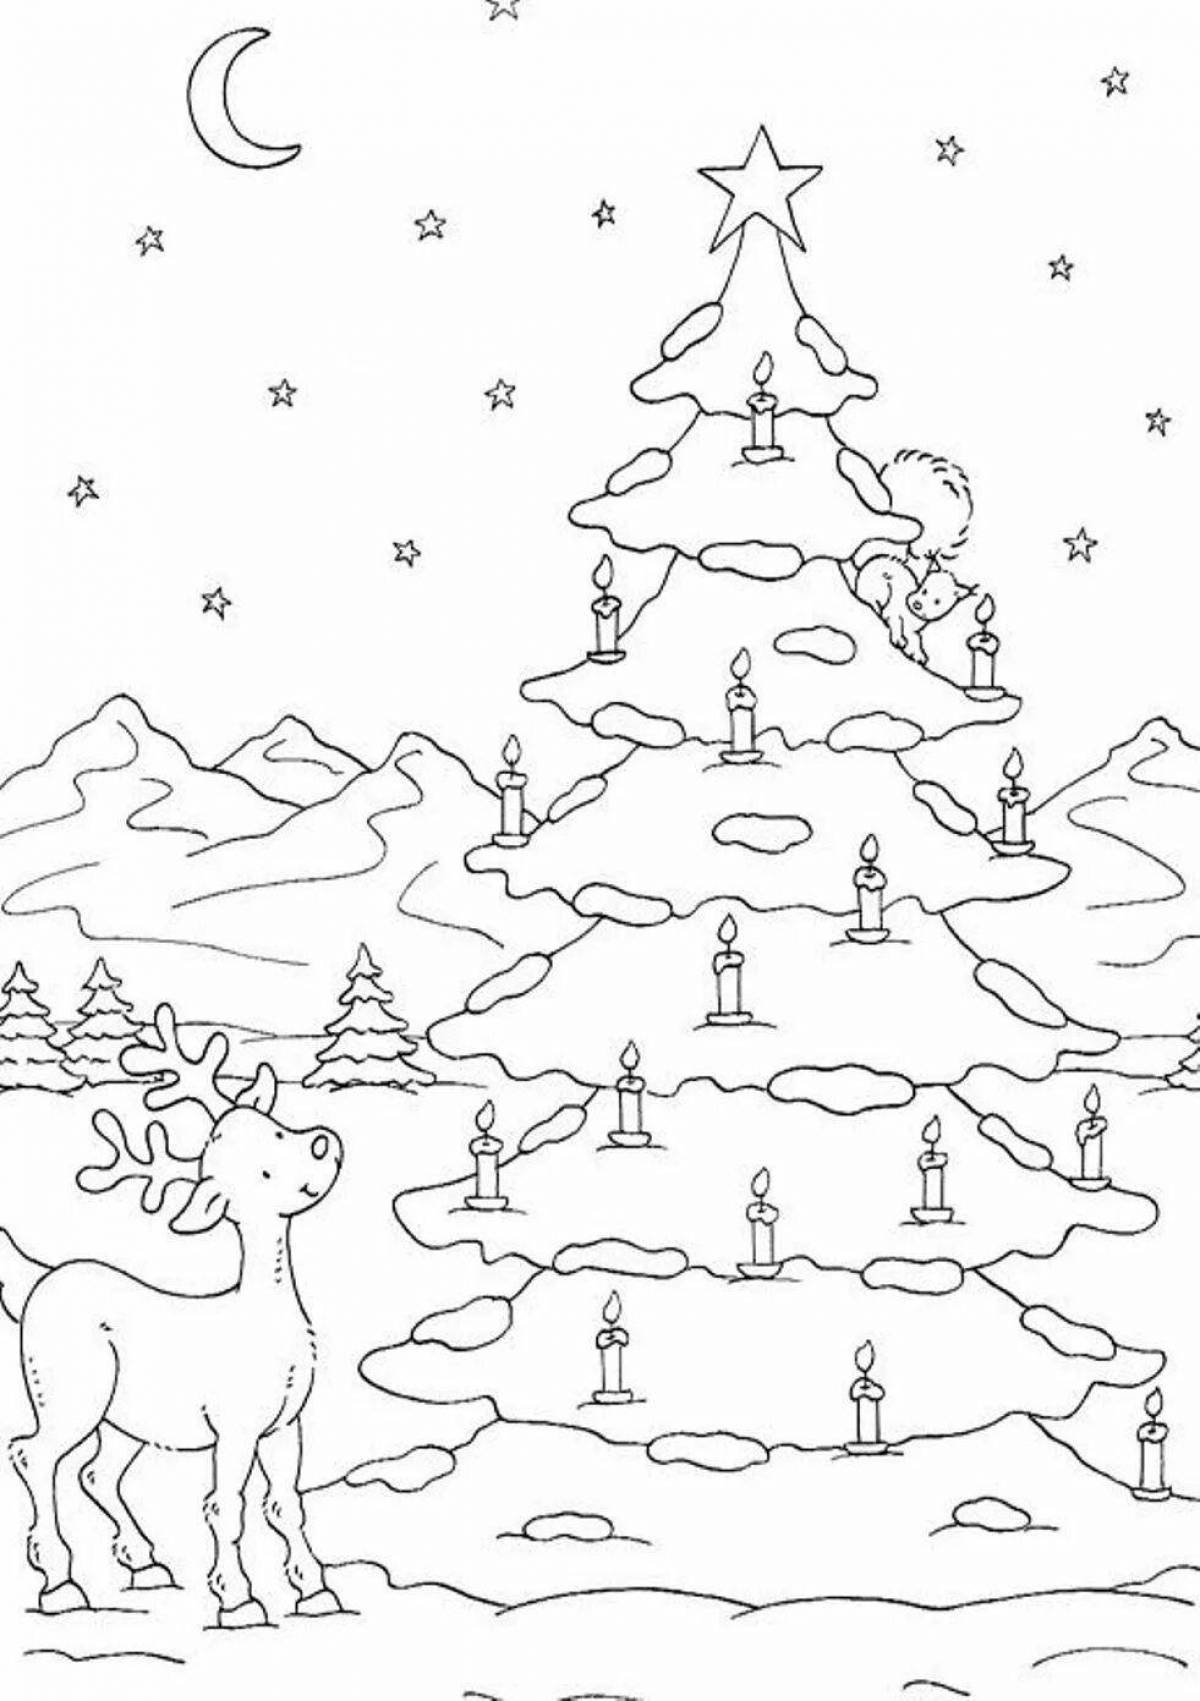 Coloring page joyful new year story